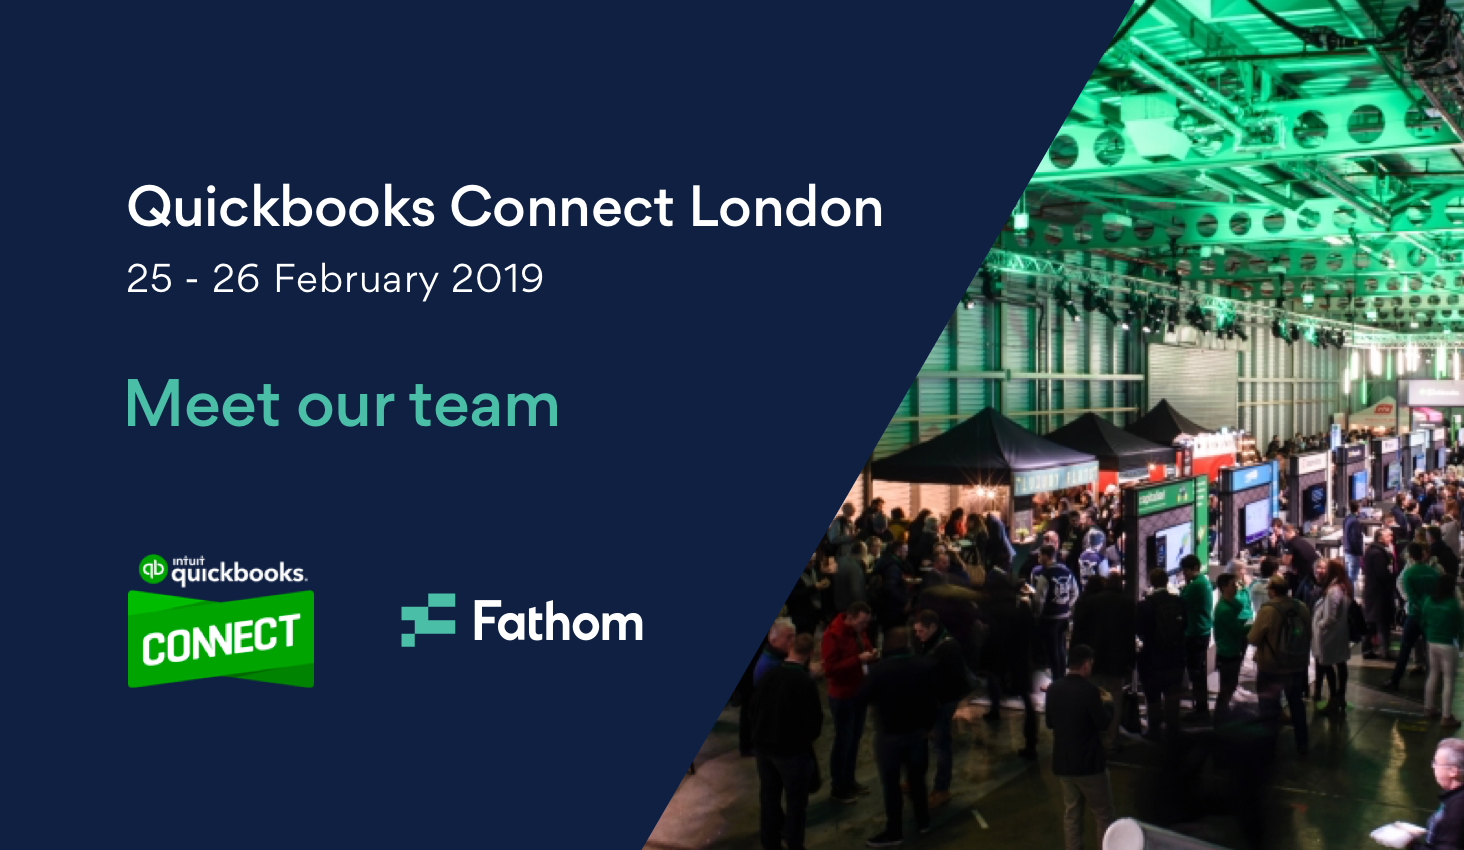 Well see you at QuickBooks Connect London!@2x (1)